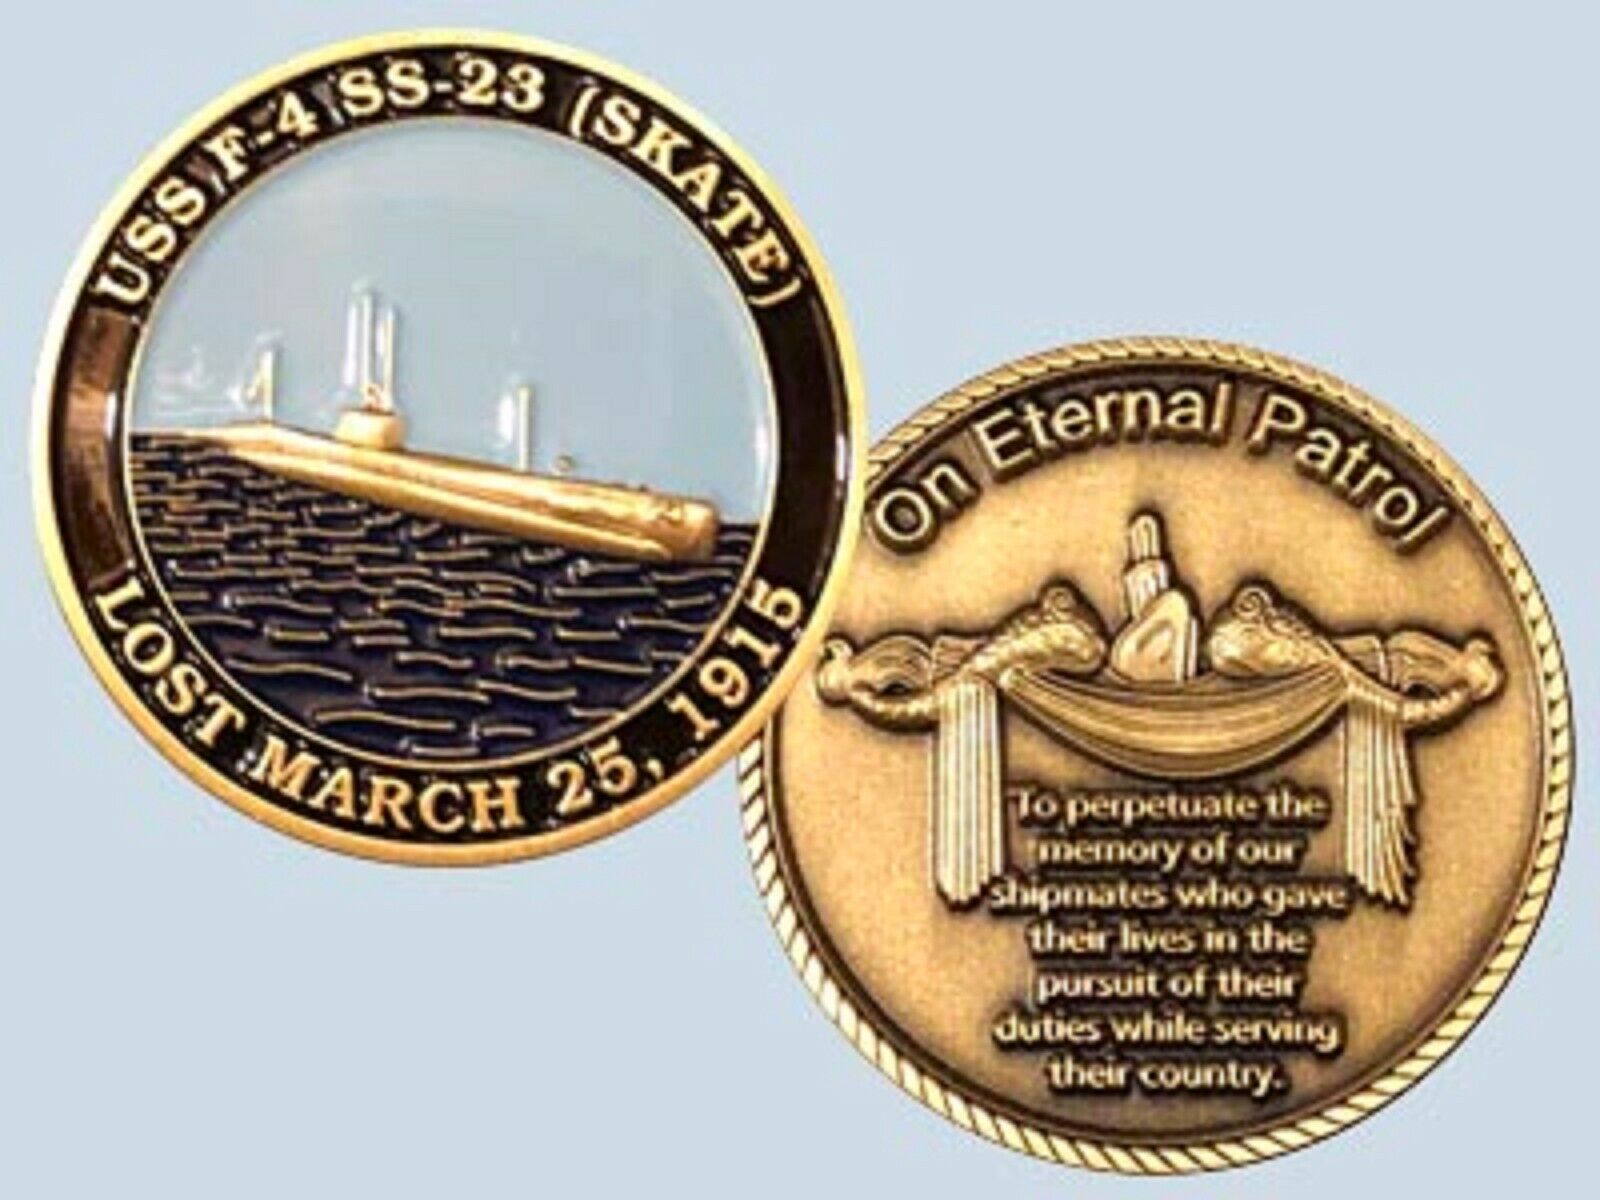 ON ETERNAL PATROL USS SKATE SS-23 SUBMARINE LOST MARCH 25, 1915 CHALLENGE COIN